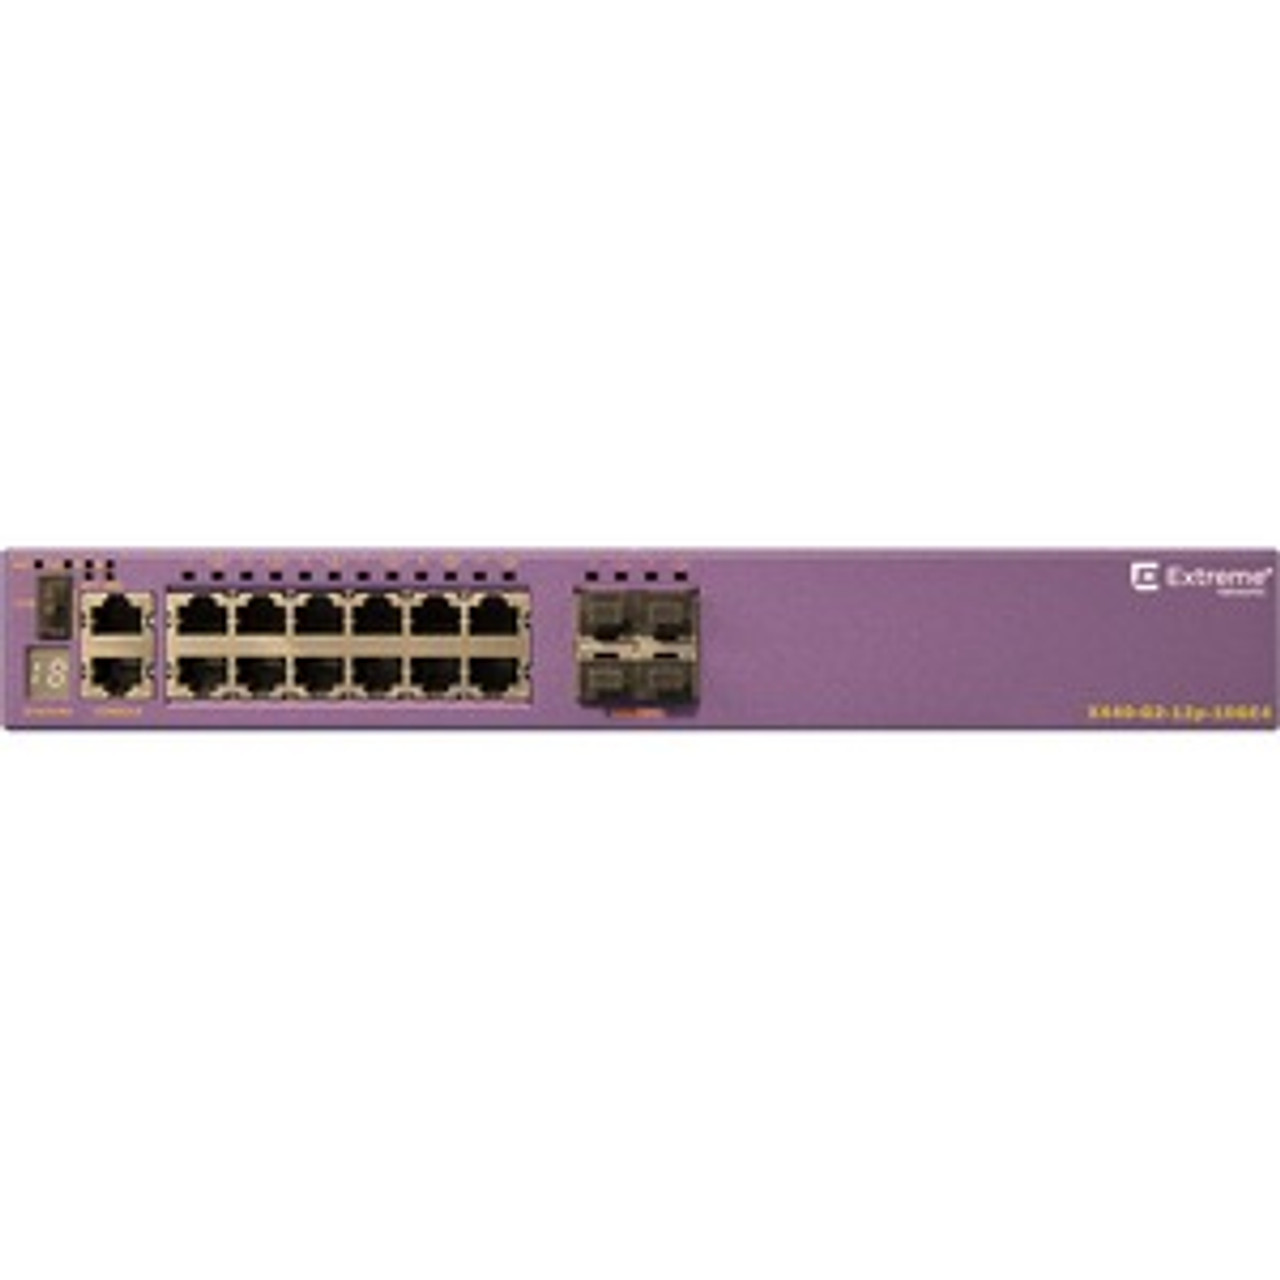 16531 Extreme Networks X440-G2-12p-10GE4 Ethernet Switch - 24 Ports - Manageable - Gigabit Ethernet - 10/100/1000Base-T, 1000Base-X - 3 Layer Supported -